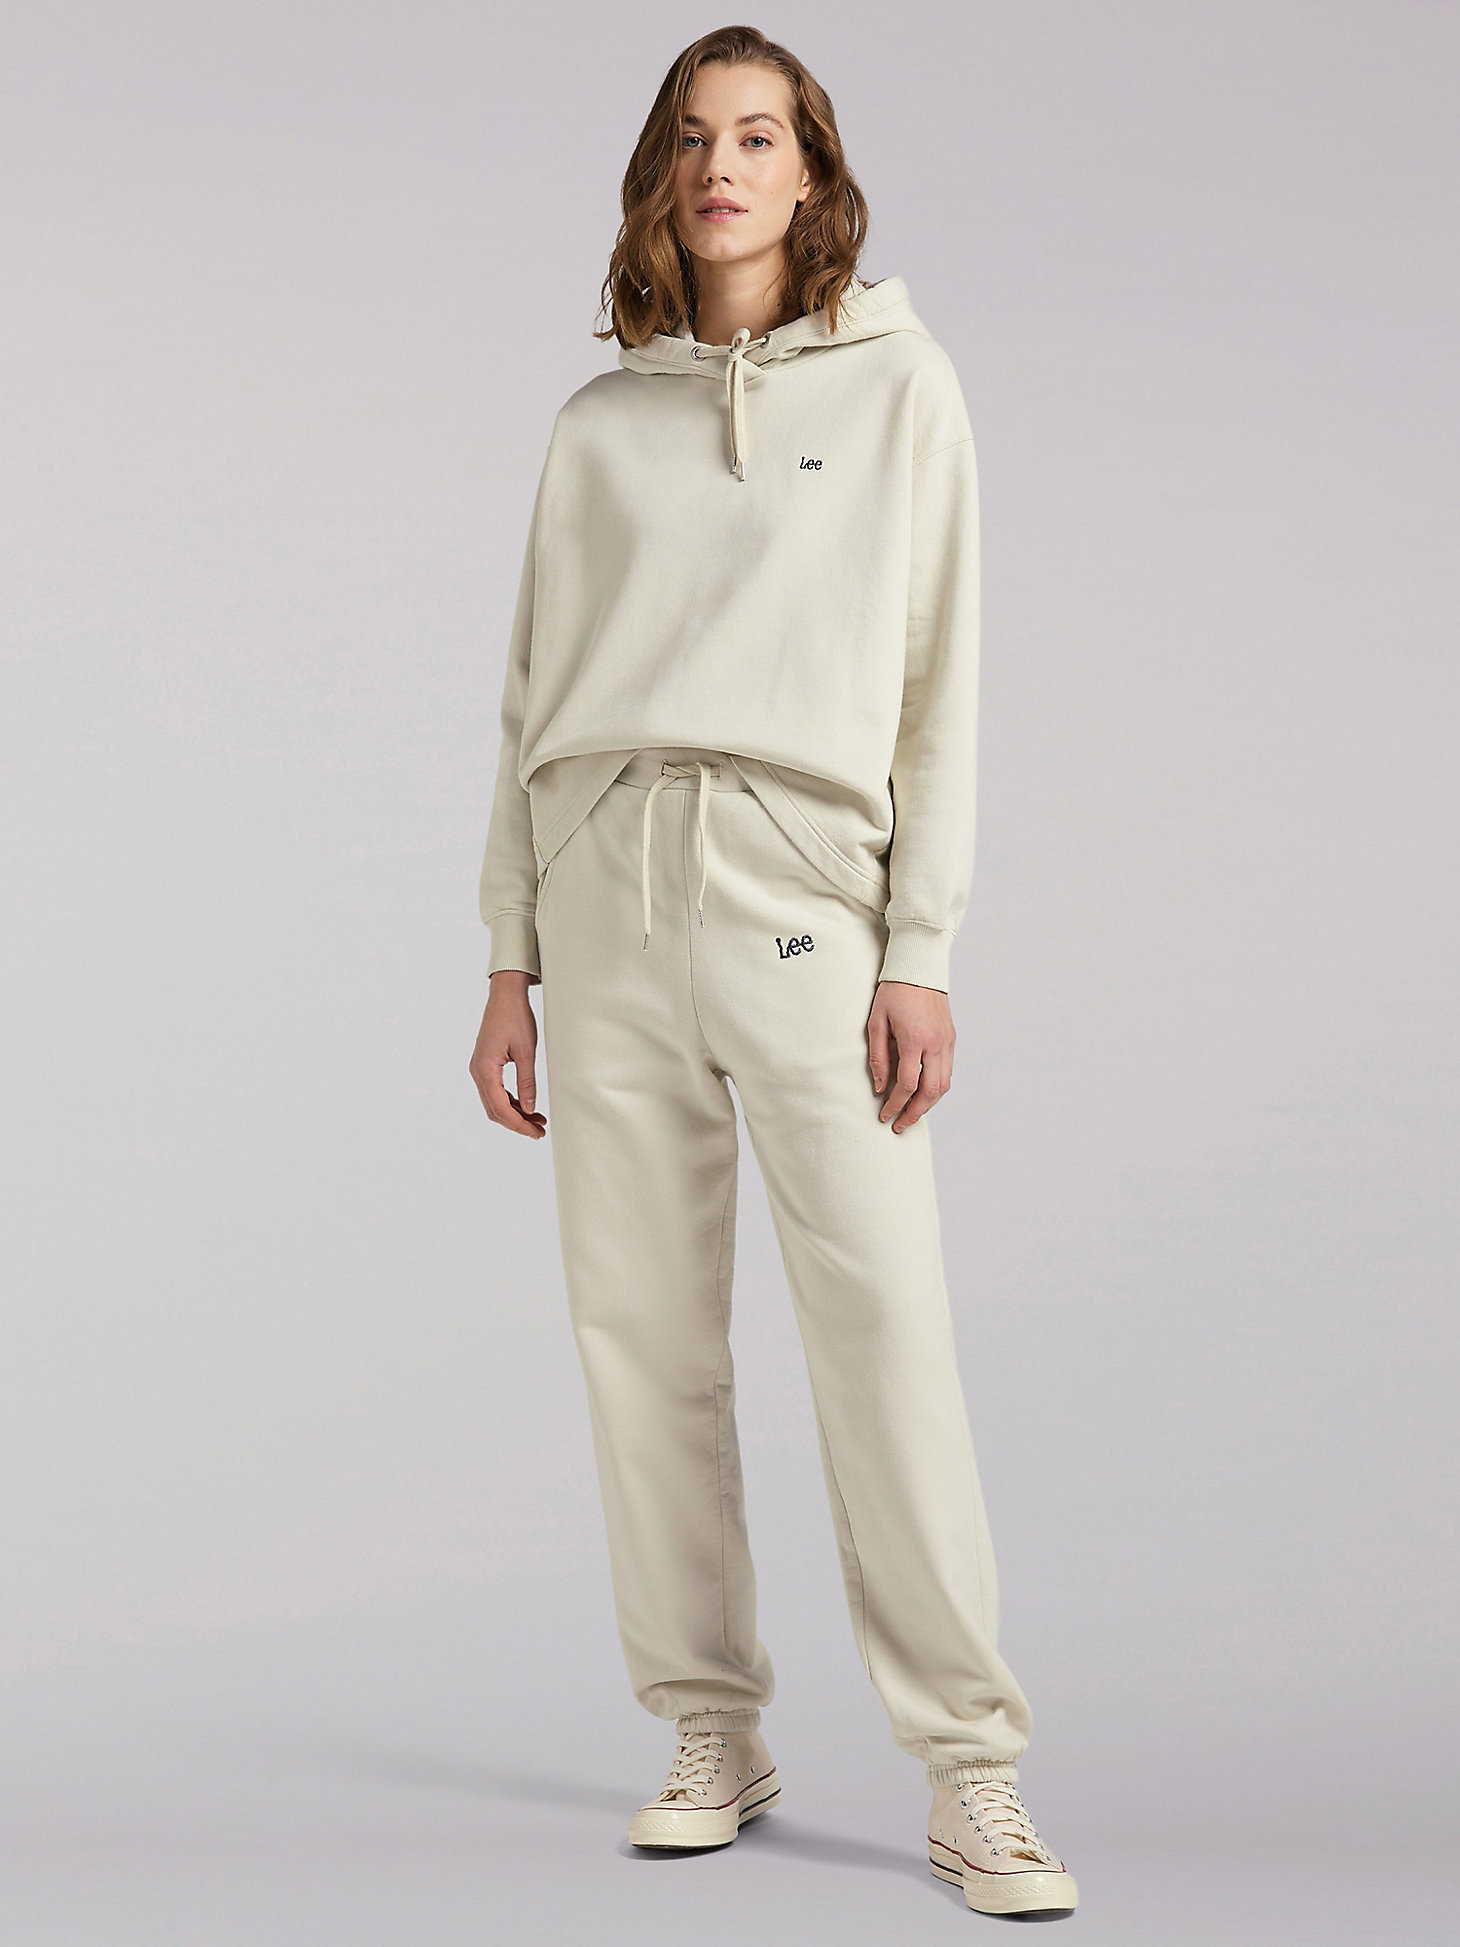 Women's Lee European Collection High Rise Relaxed Sweatpant in Workwear White main view